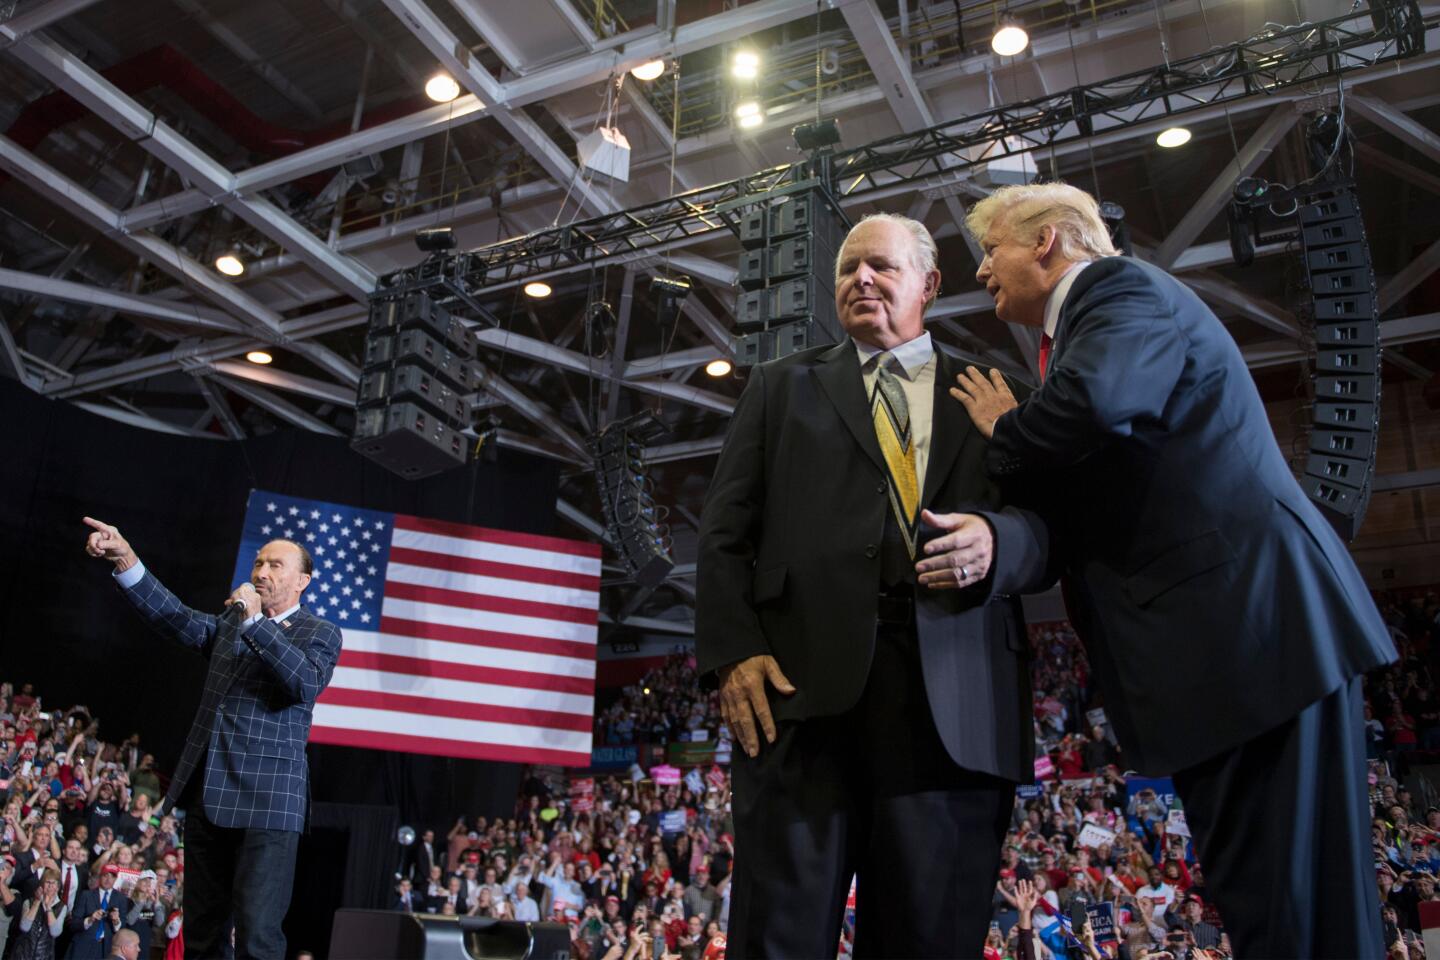 Trump speaks to Limbaugh at a rally.